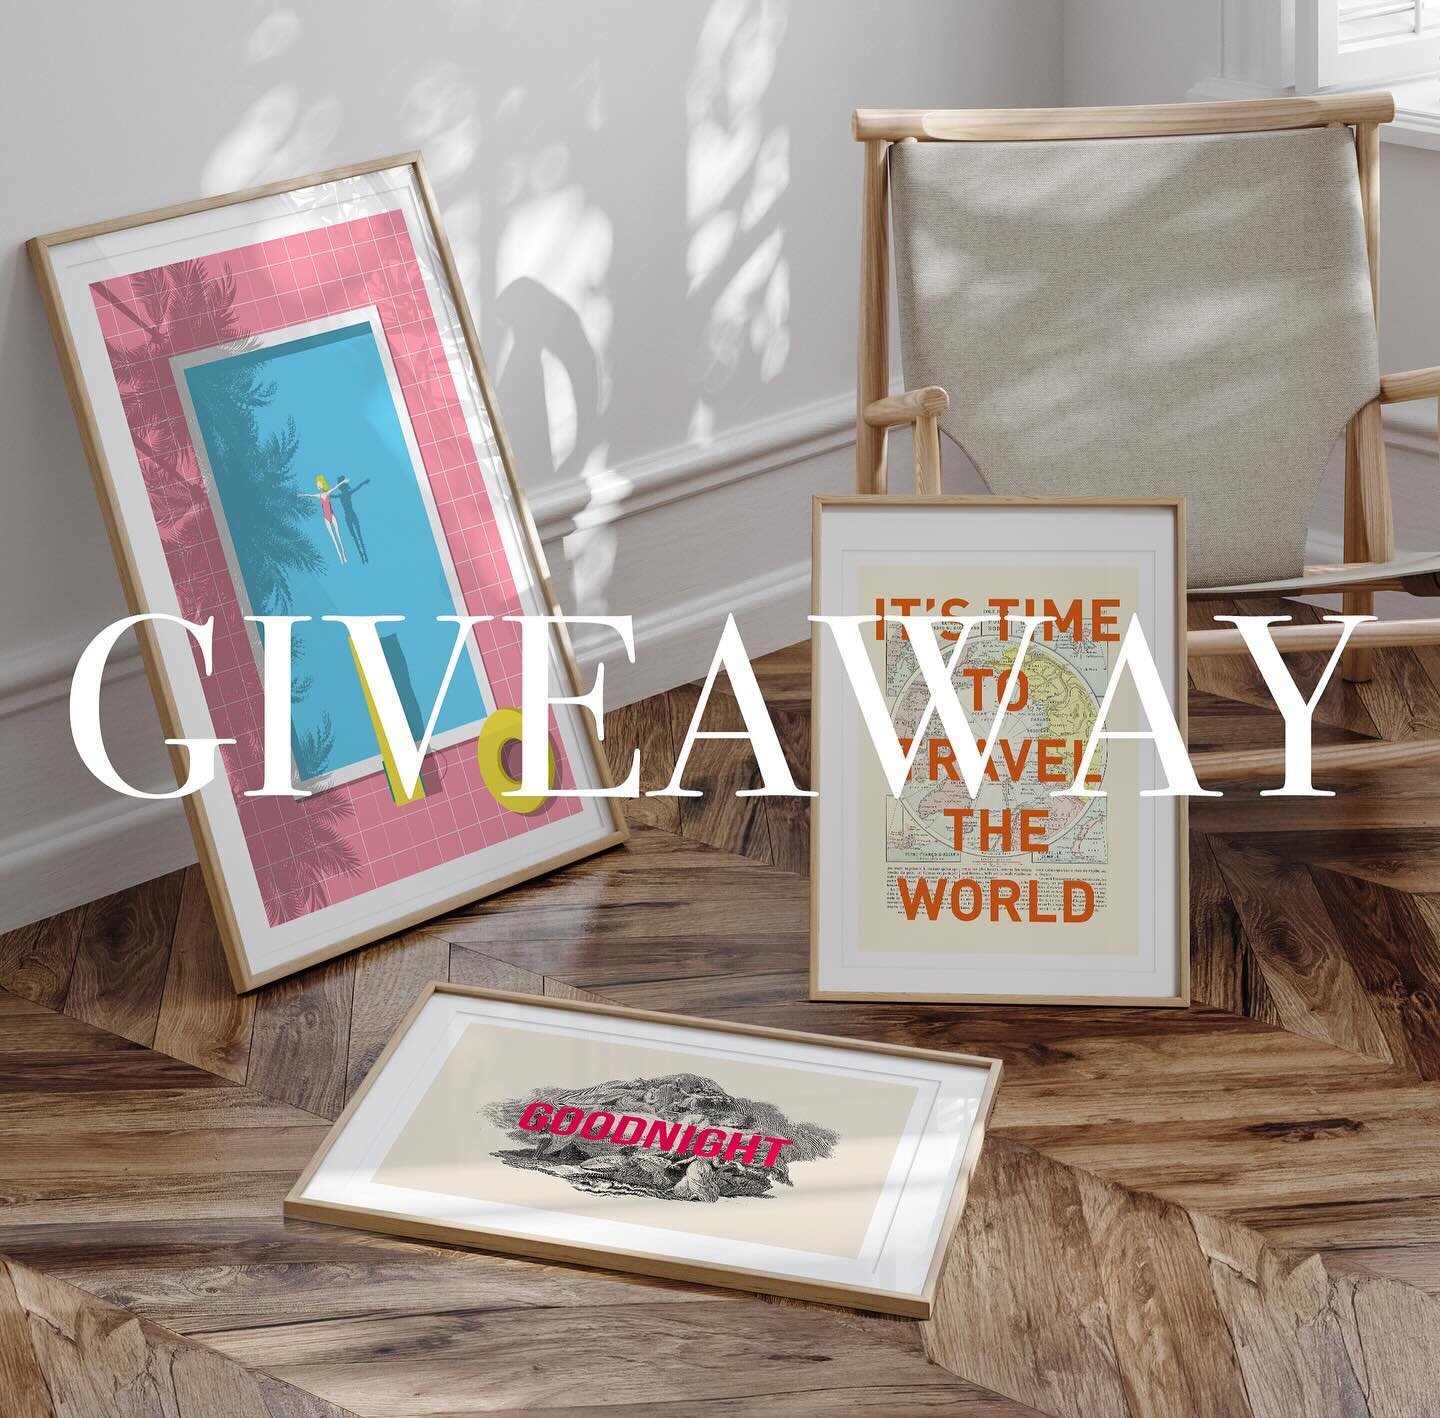 GIVEAWAY TIME! To celebrate a month of Arthouse91 we are giving away not one but THREE prints to one lucky winner. The Pool Print in the massive 50x70cm size and the Goodnight and Travel prints in the bestselling 30x40cm!

How to enter:
1. Make sure 